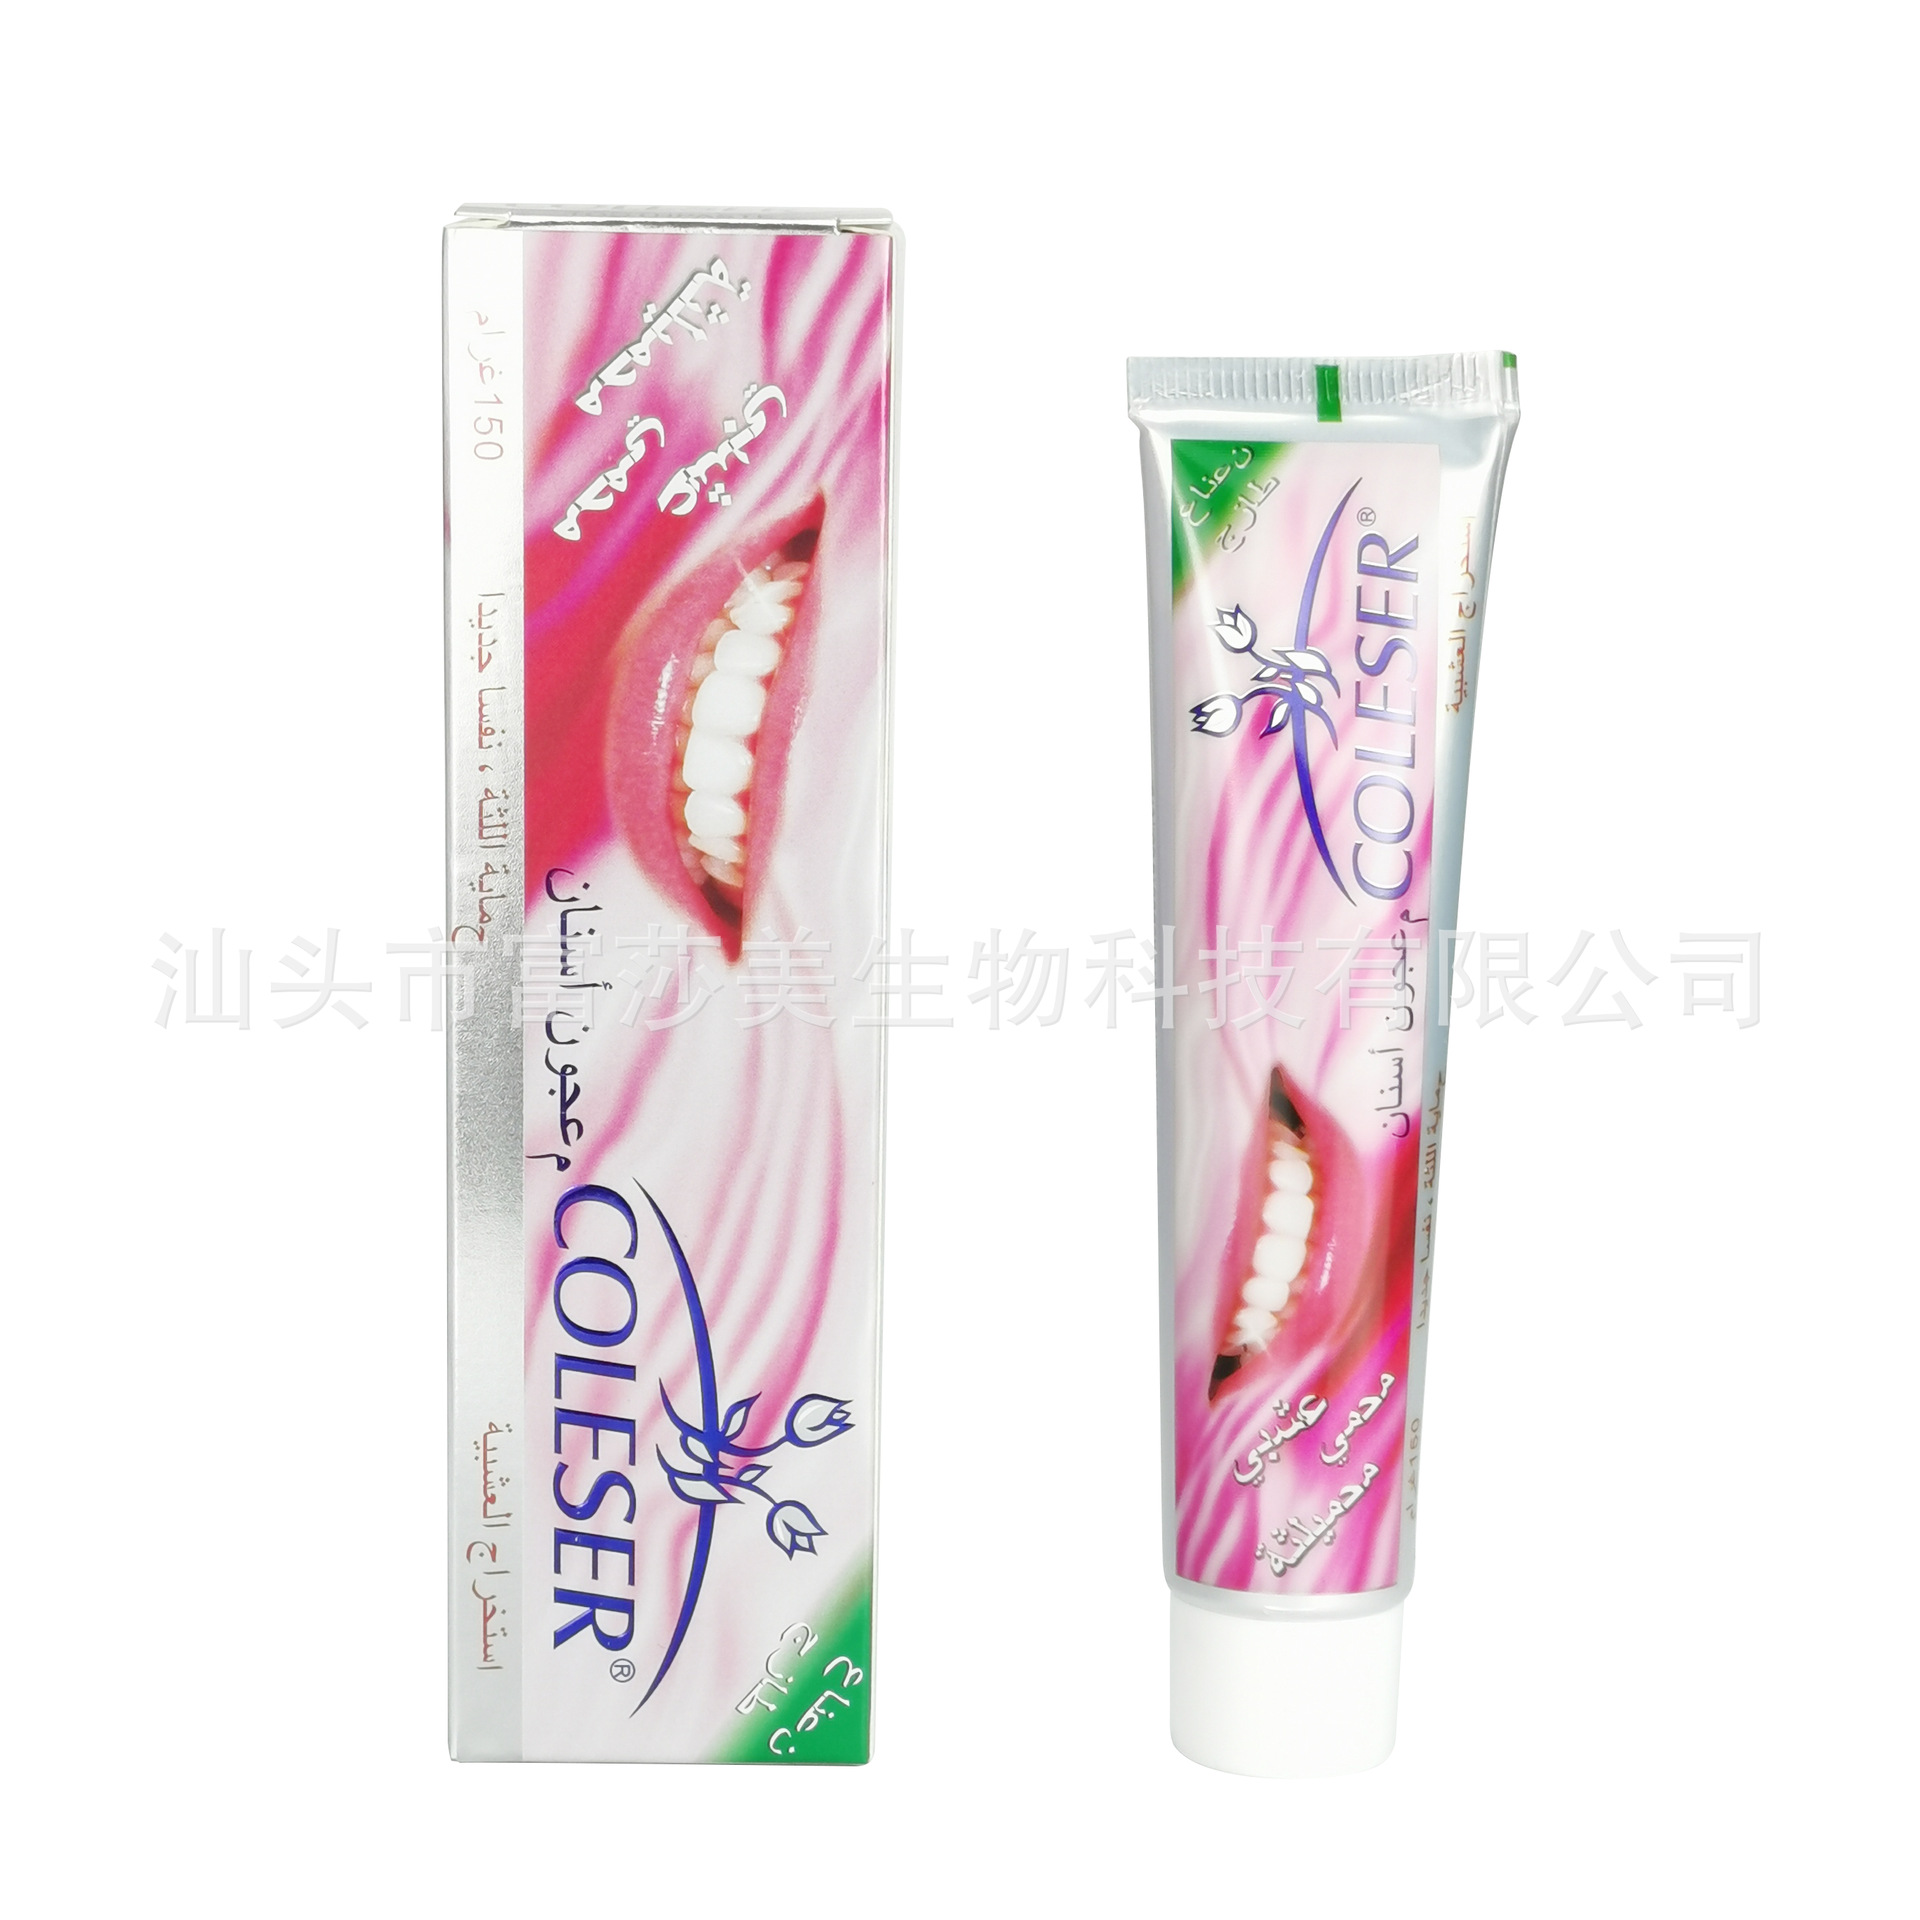 Customized Low Price 150G Herbal Herbal Foreign Trade English African Middle East Aloe Toothpaste Toothpaste